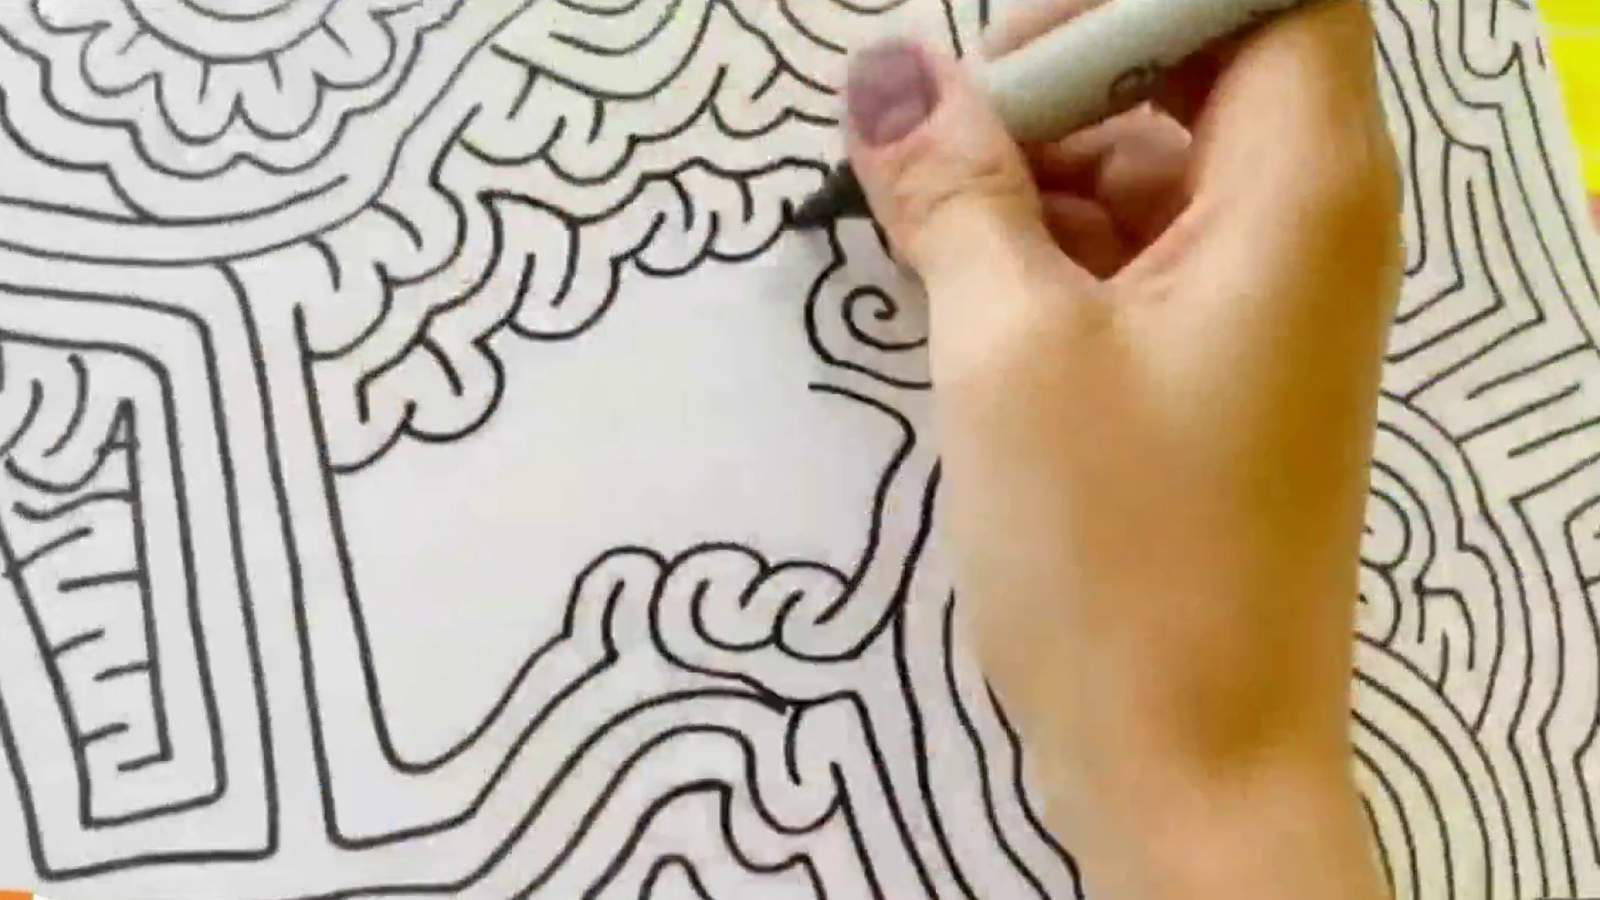 Get lost in this world record setting maze